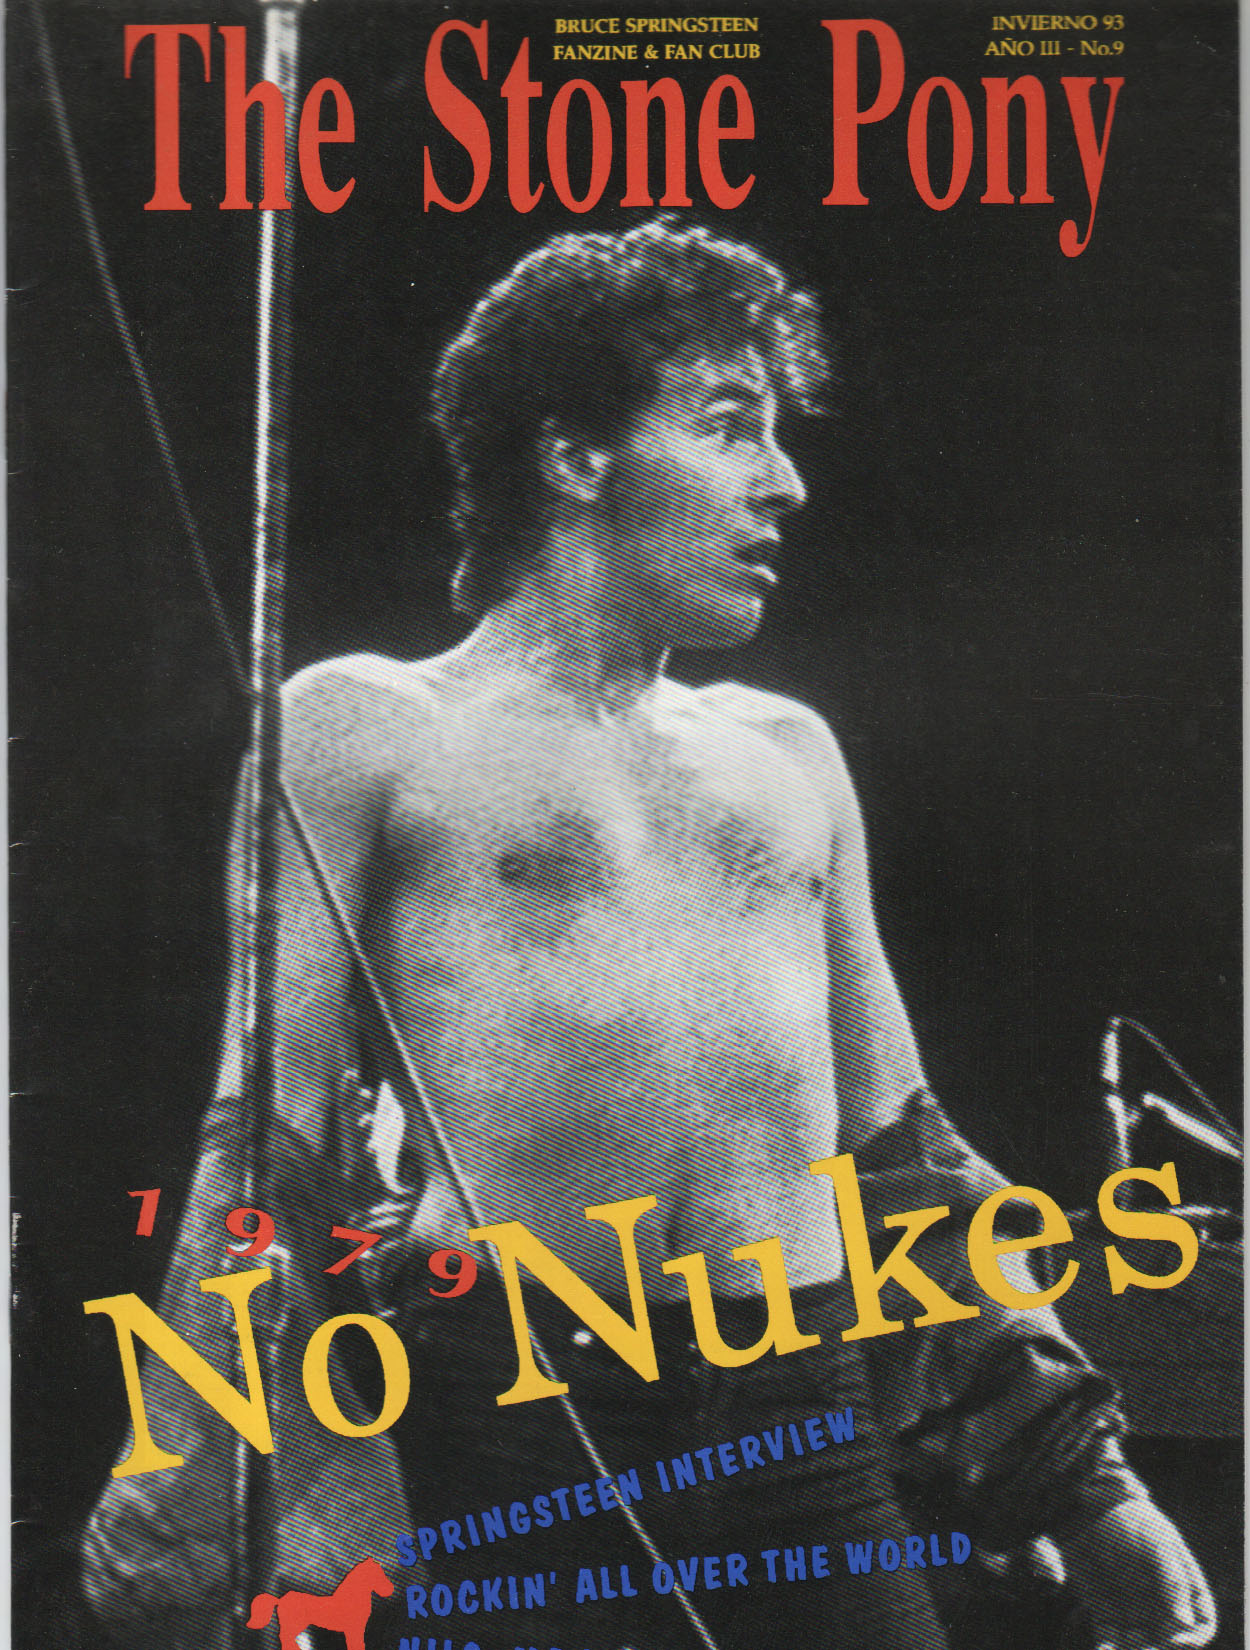 Bruce Springsteen Collection: The Stone Pony [Issue #9]